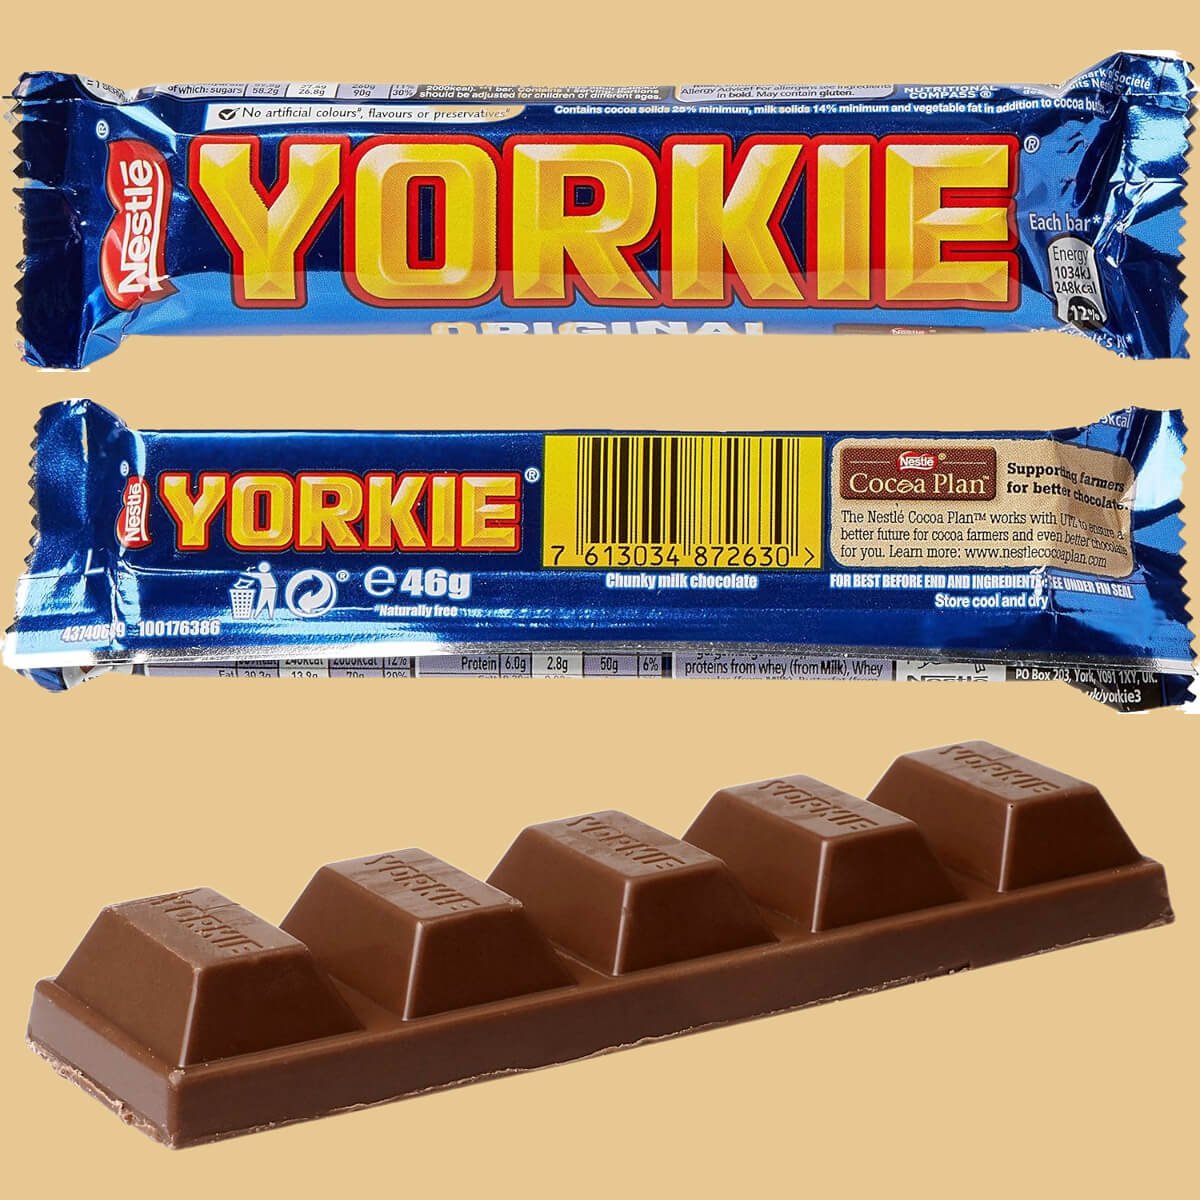 Yorkie - The Manly Chocolate Bar!